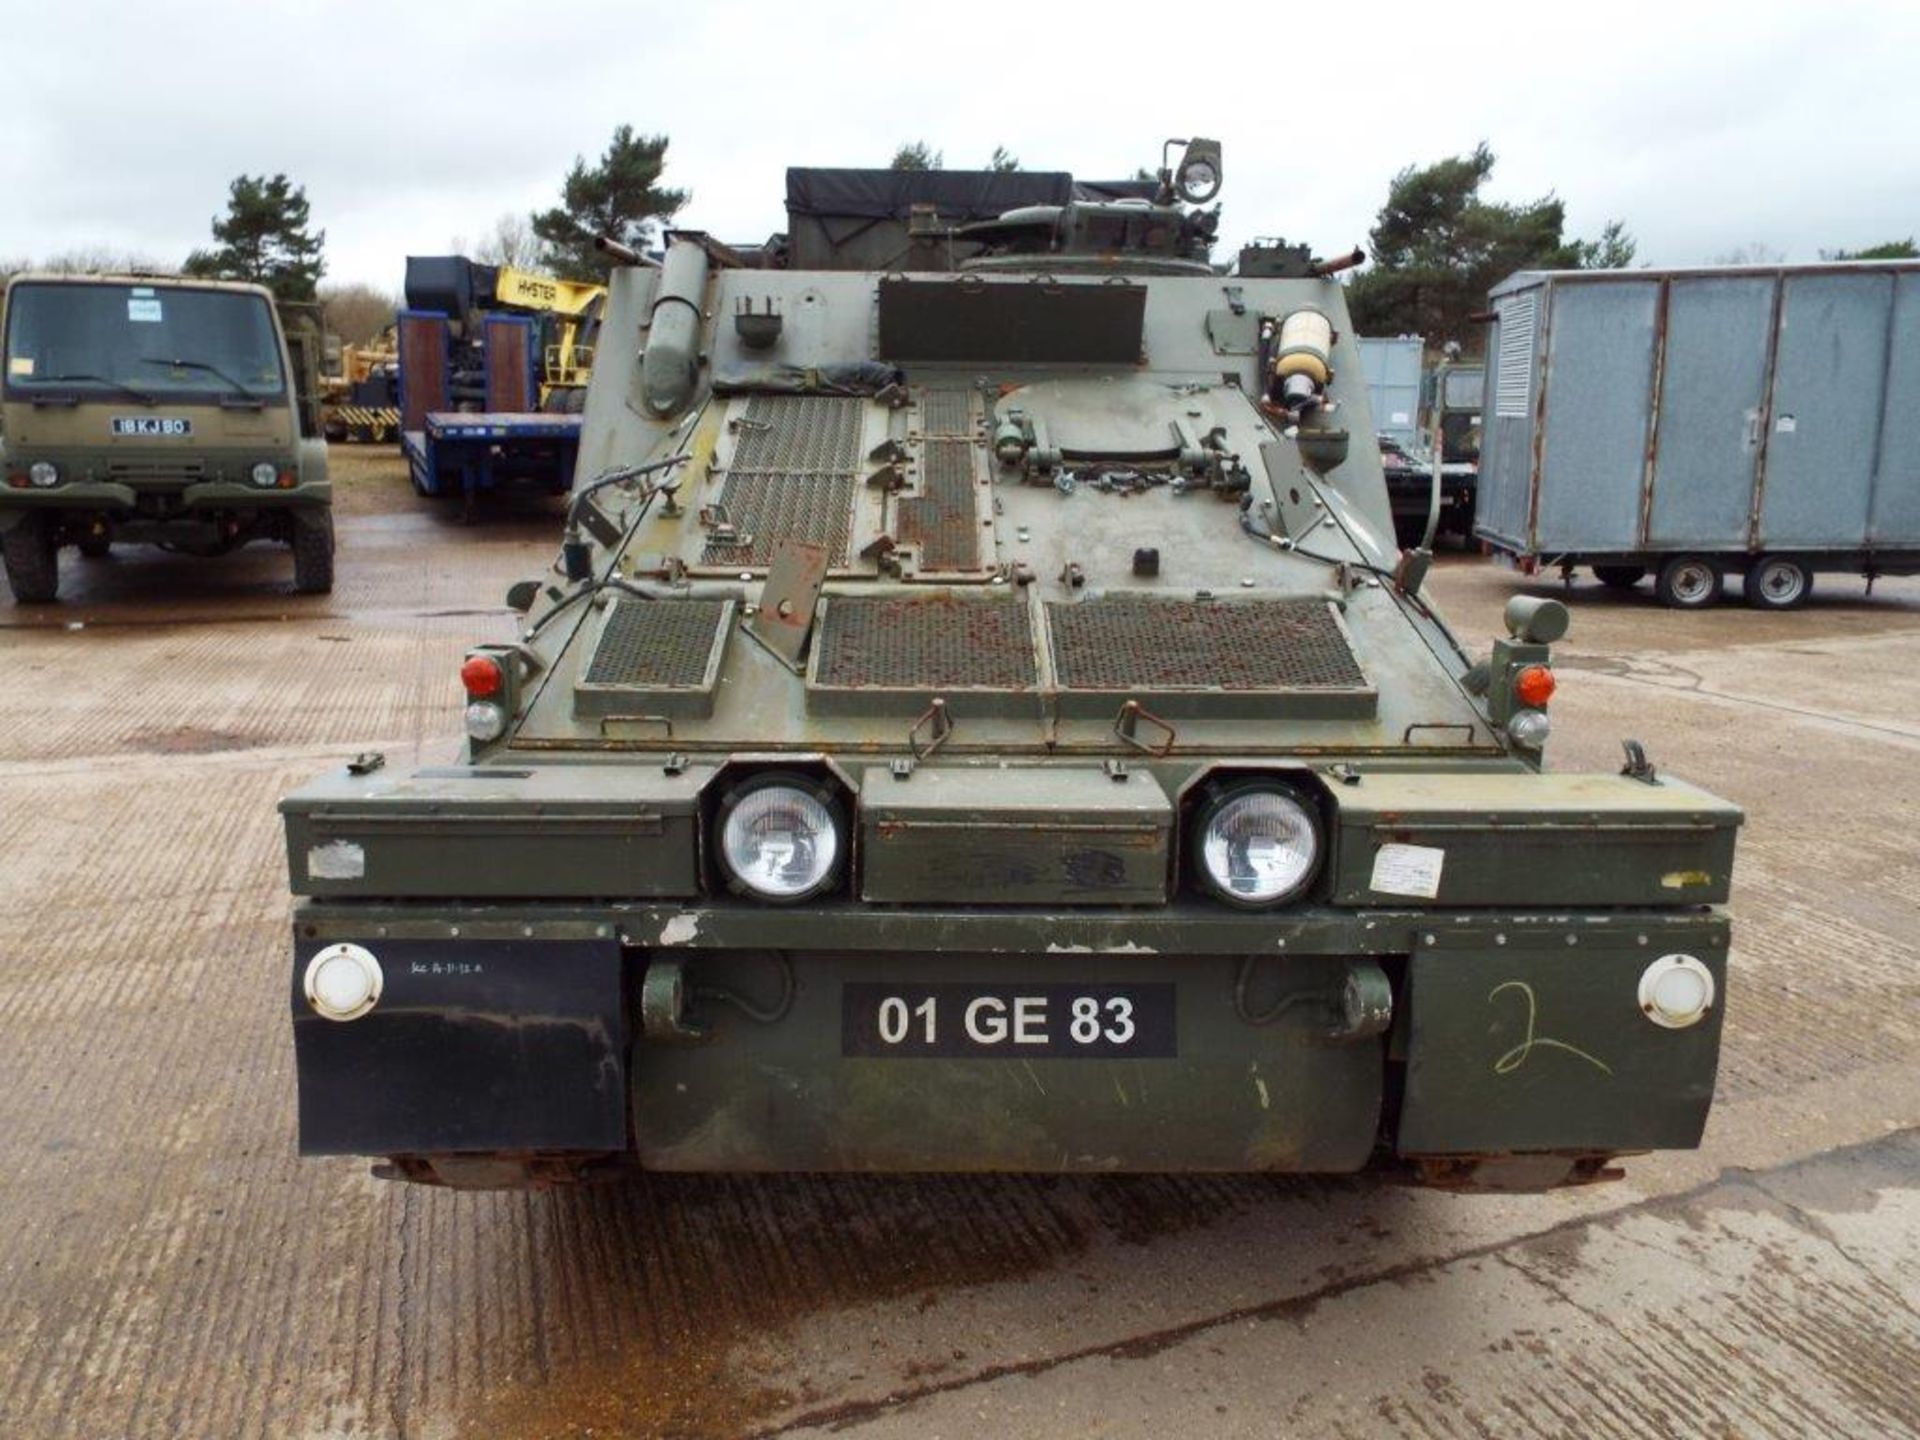 CVRT (Combat Vehicle Reconnaissance Tracked) FV105 Sultan Armoured Personnel Carrier - Image 2 of 32